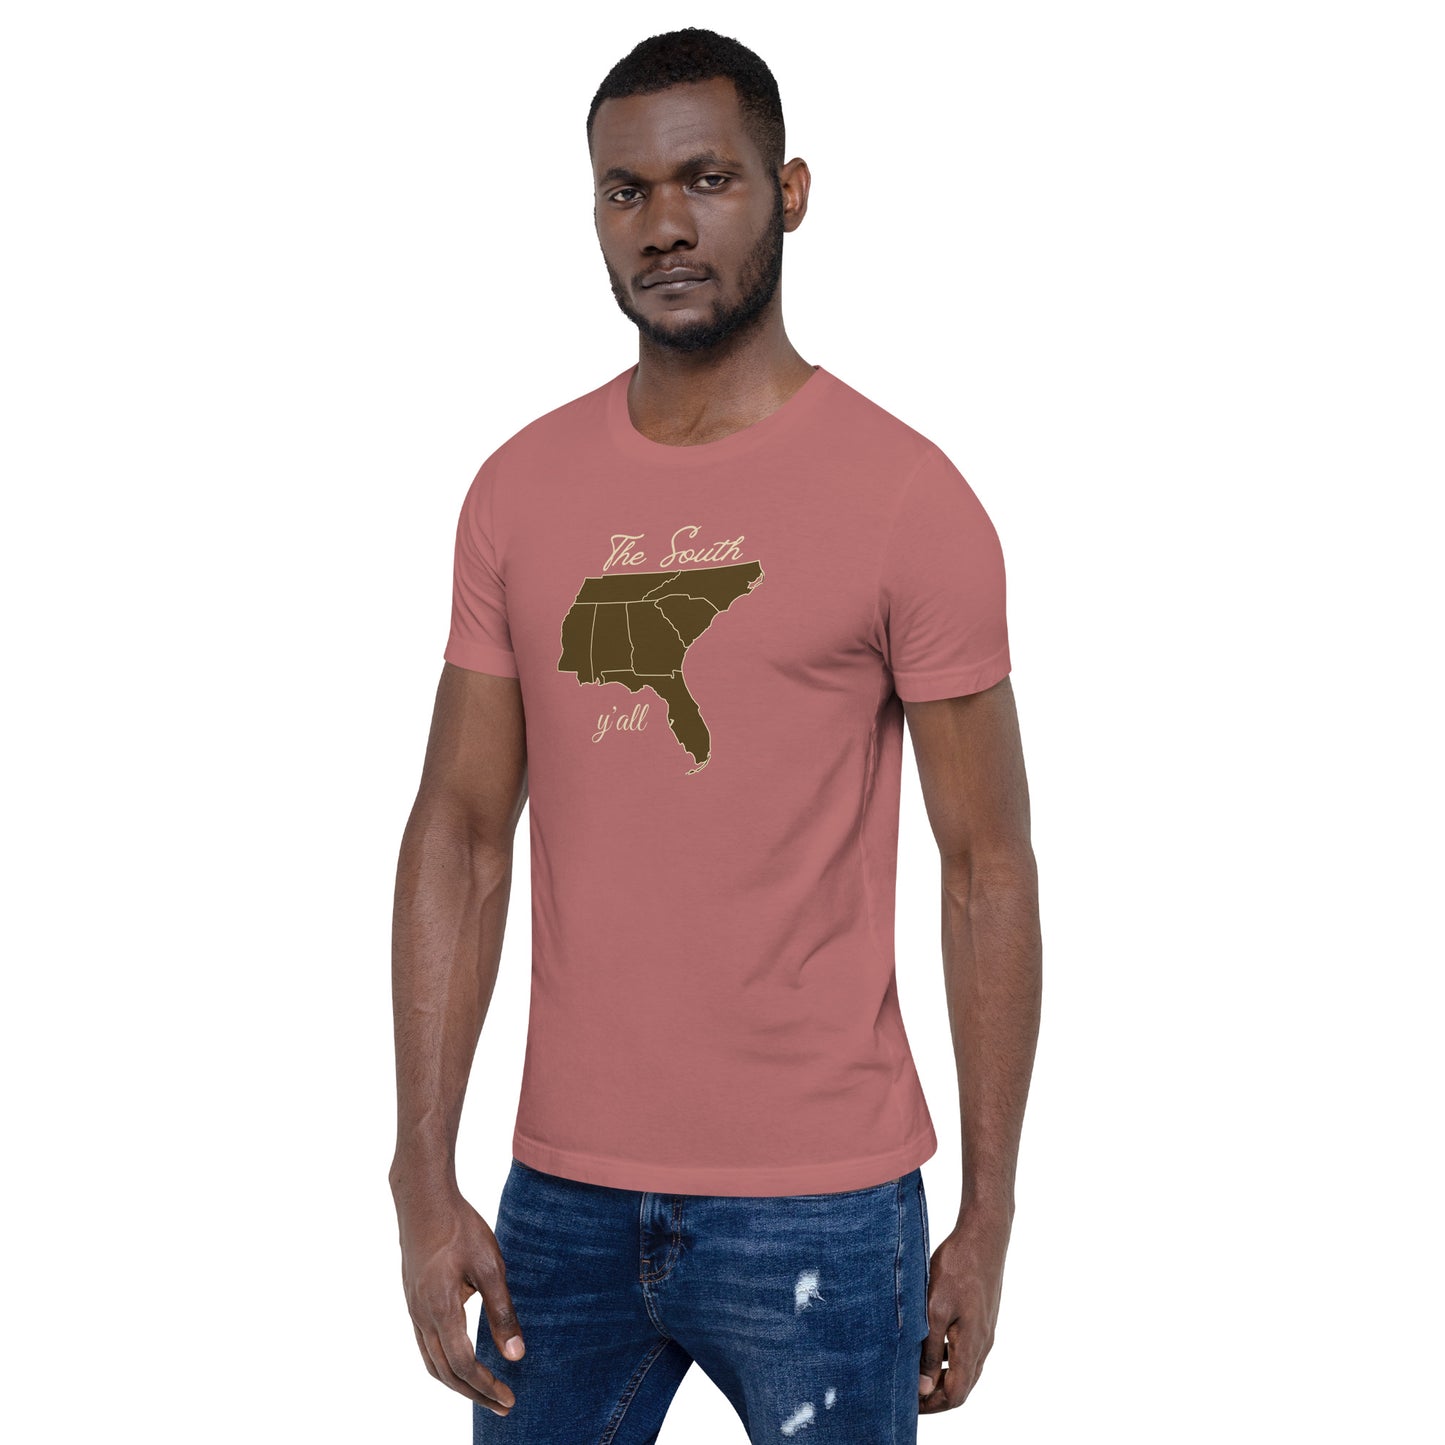 The South Y'all / T-Shirt